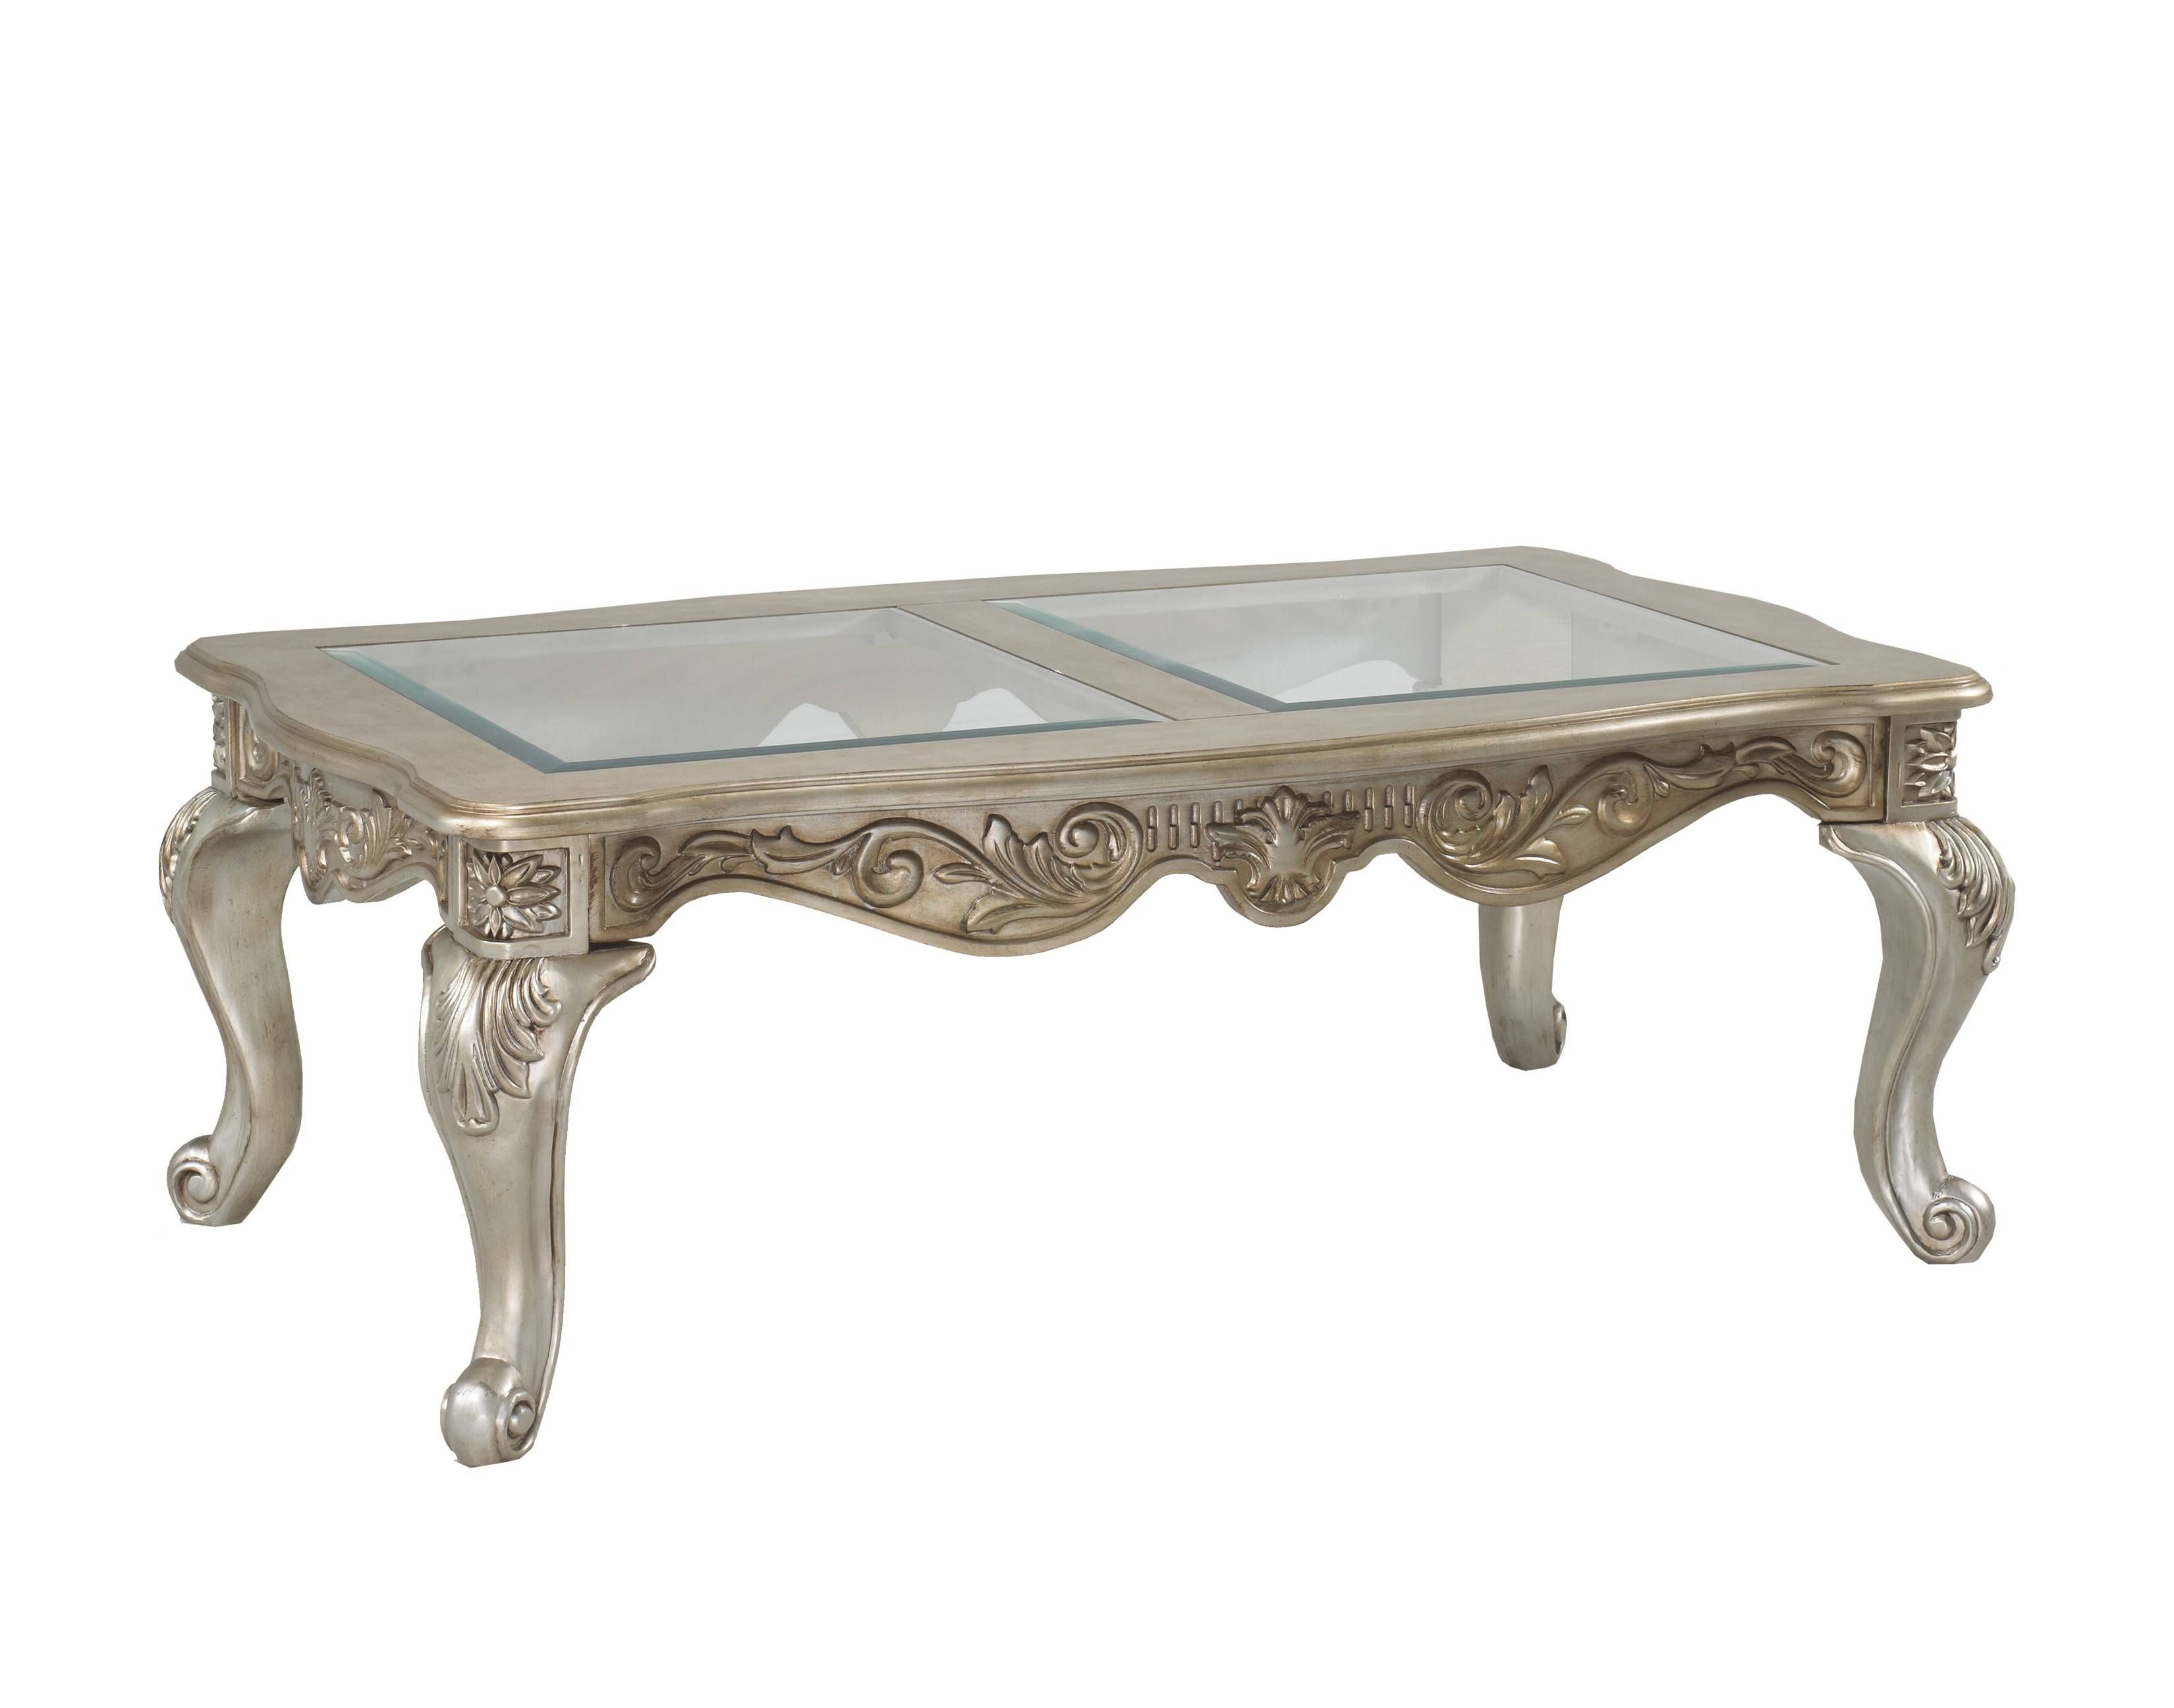 Antique French Glass Top Coffee Tables | Coffee Tables Decoration Intended For Antique Glass Top Coffee Tables (View 1 of 30)